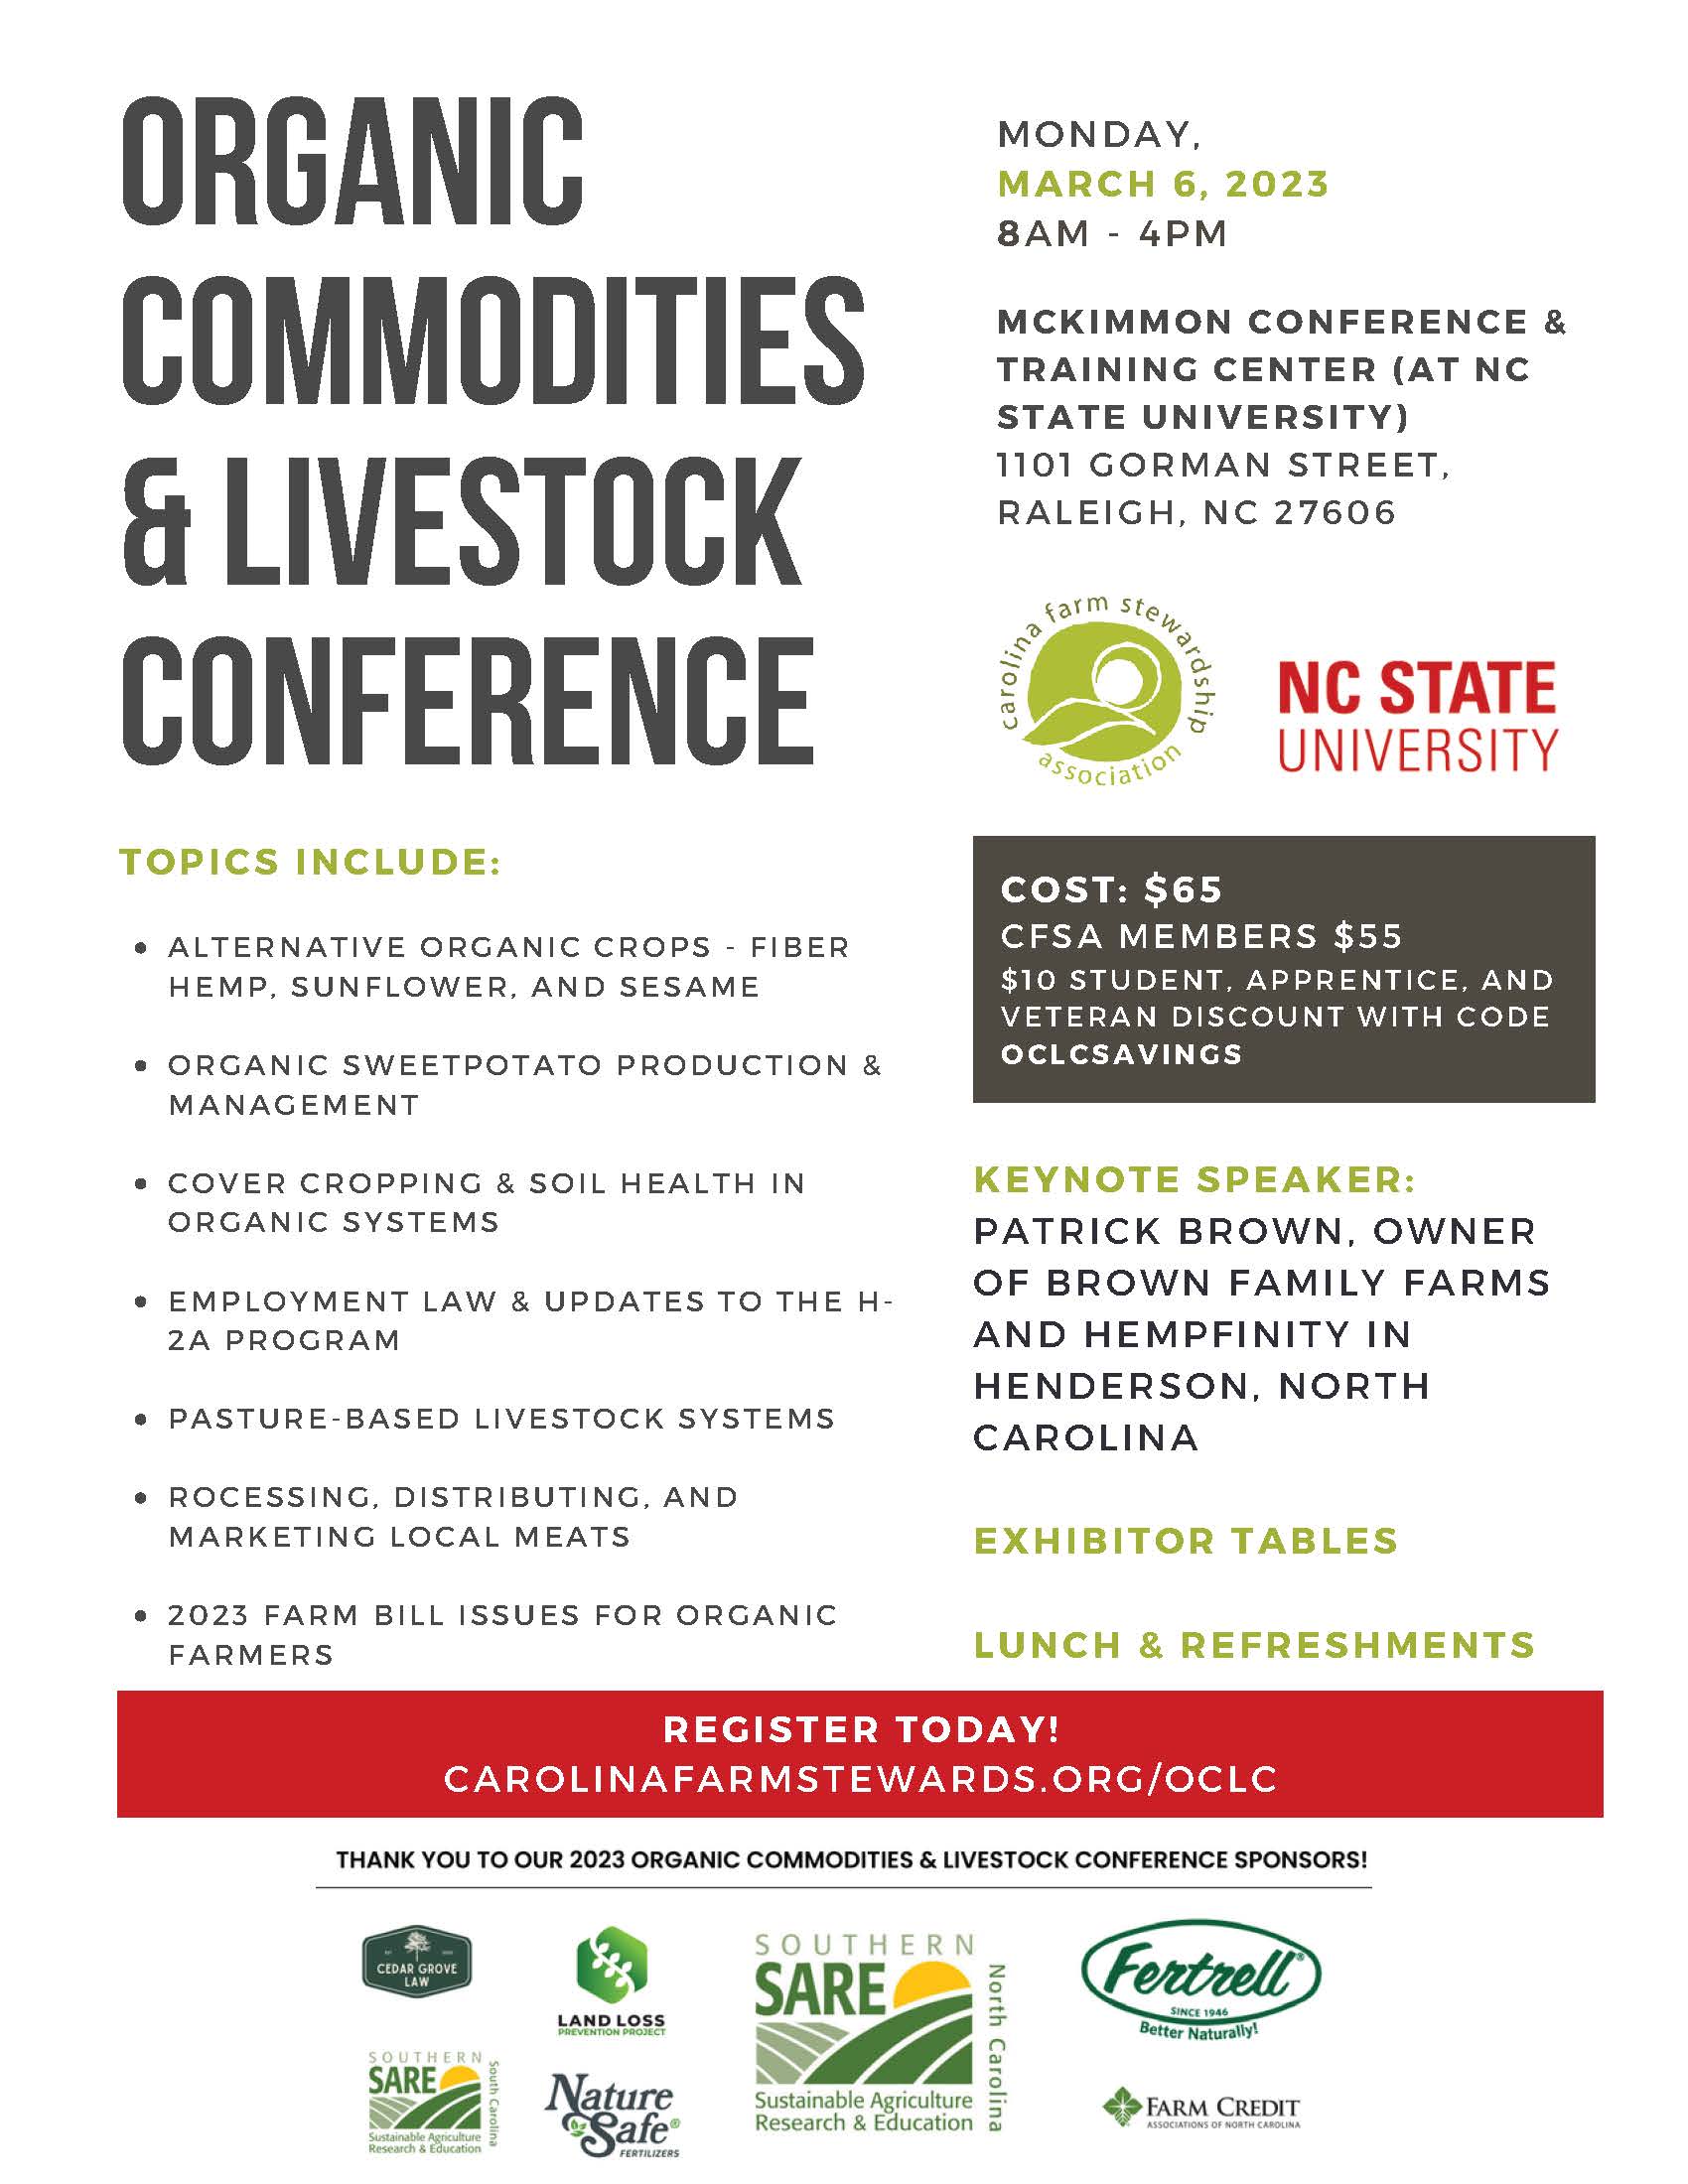 Organic Commodity and Livestock Conference Flyer